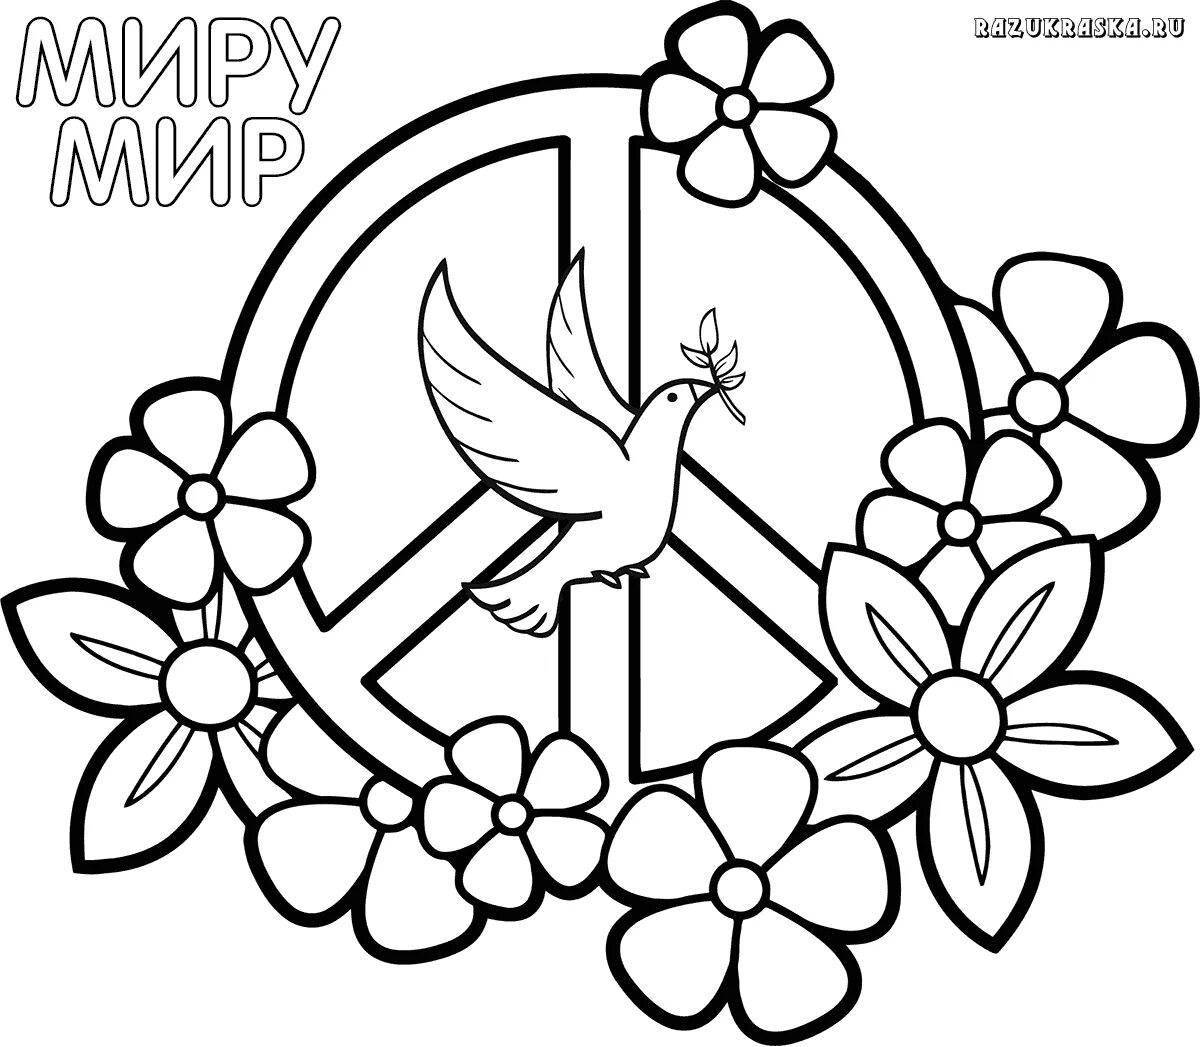 Exquisite world peace without war coloring pages